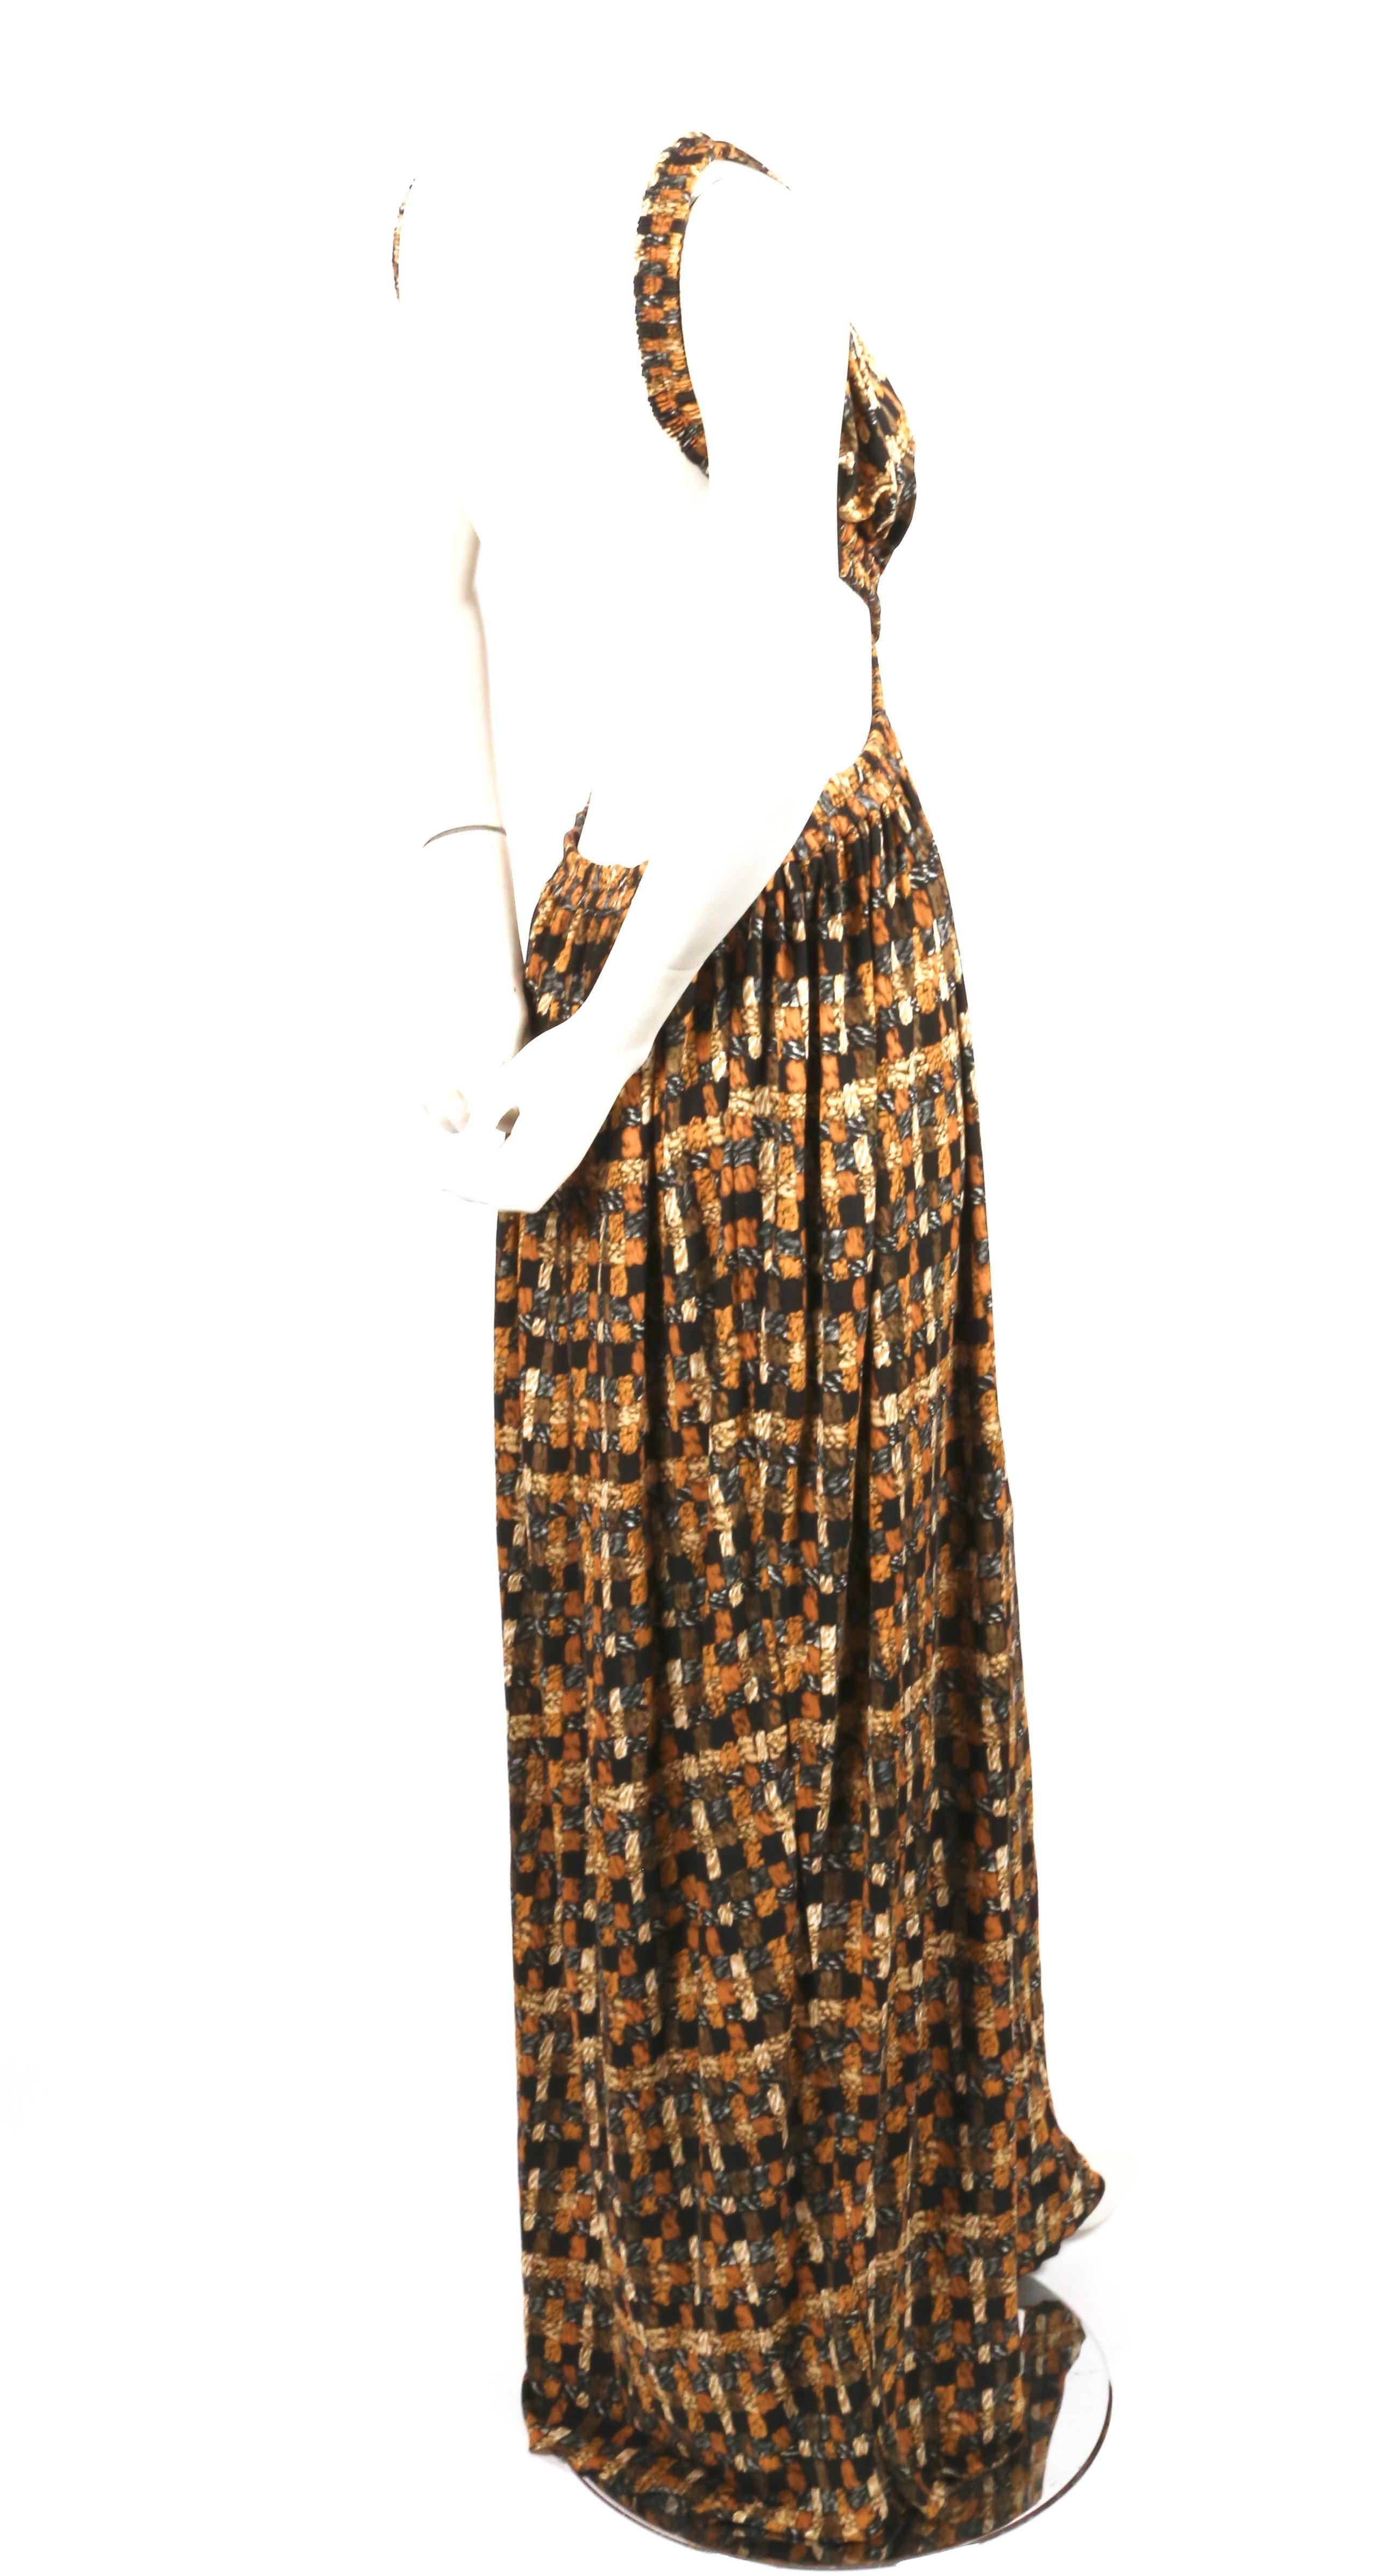 Brown 2017 CELINE by PHOEBE PHILO basket woven print runway dress with cutouts